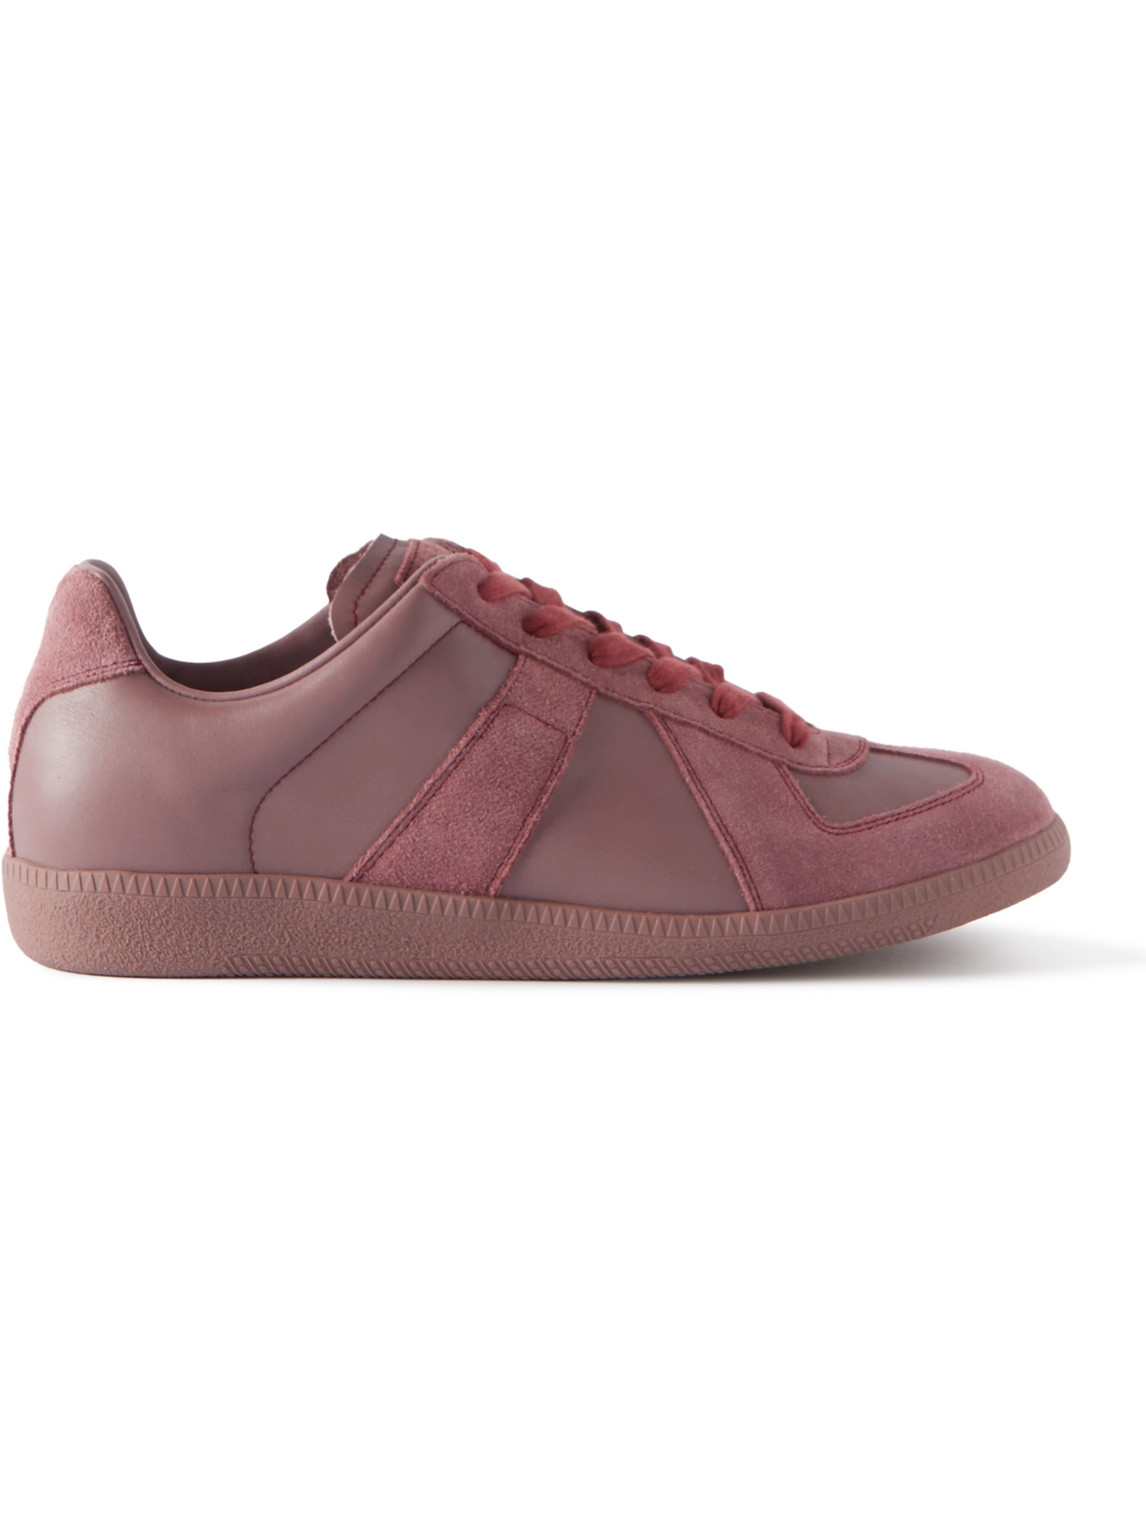 Maison Margiela Replica Leather And Suede Sneakers In Pink | ModeSens